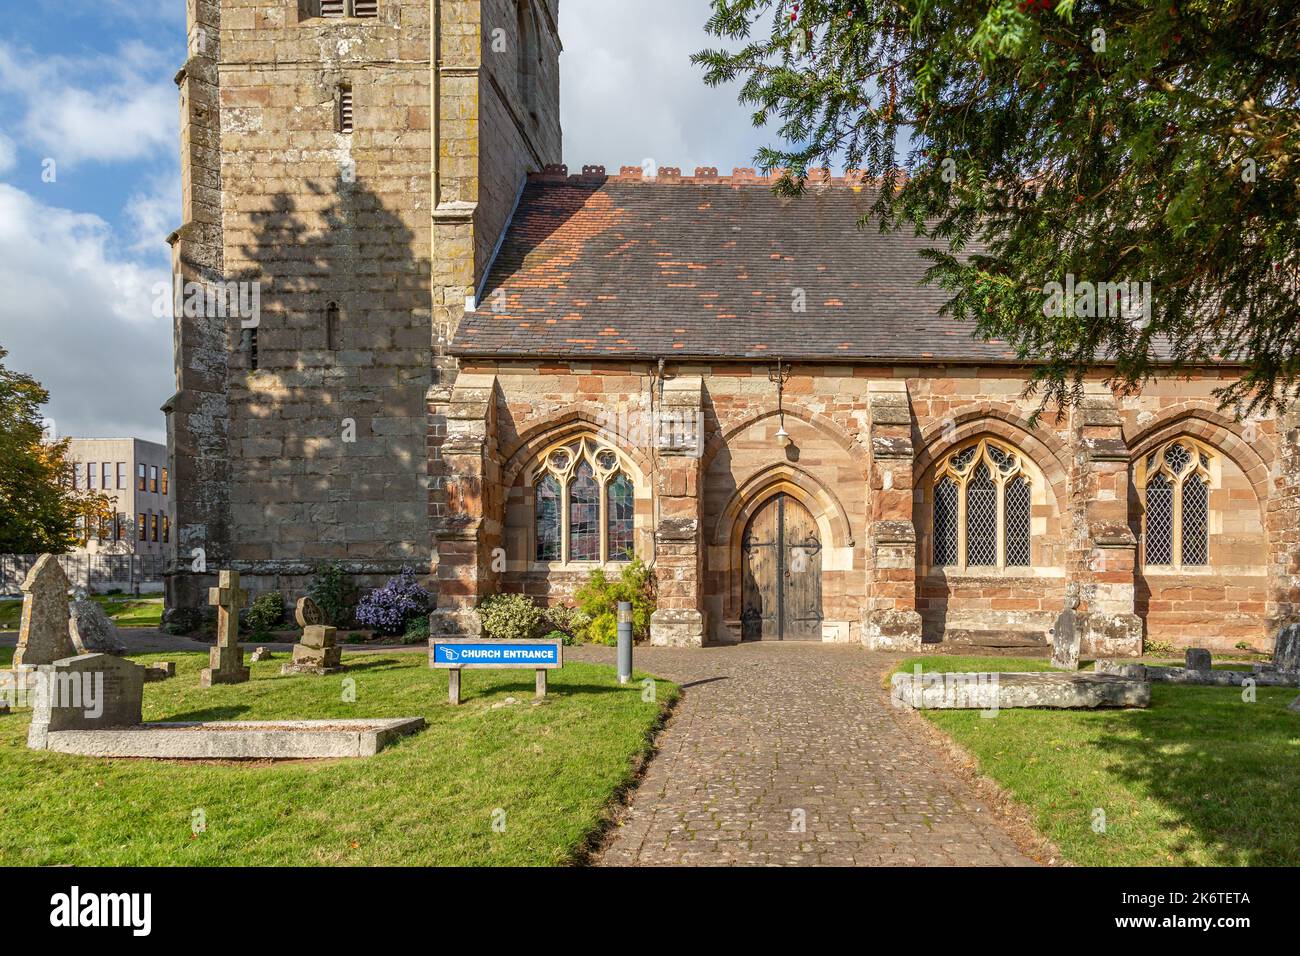 St. Peter's Church on Ipsley Church Lane, Redditch, on a sunny autumn day with blue sky. Stock Photo